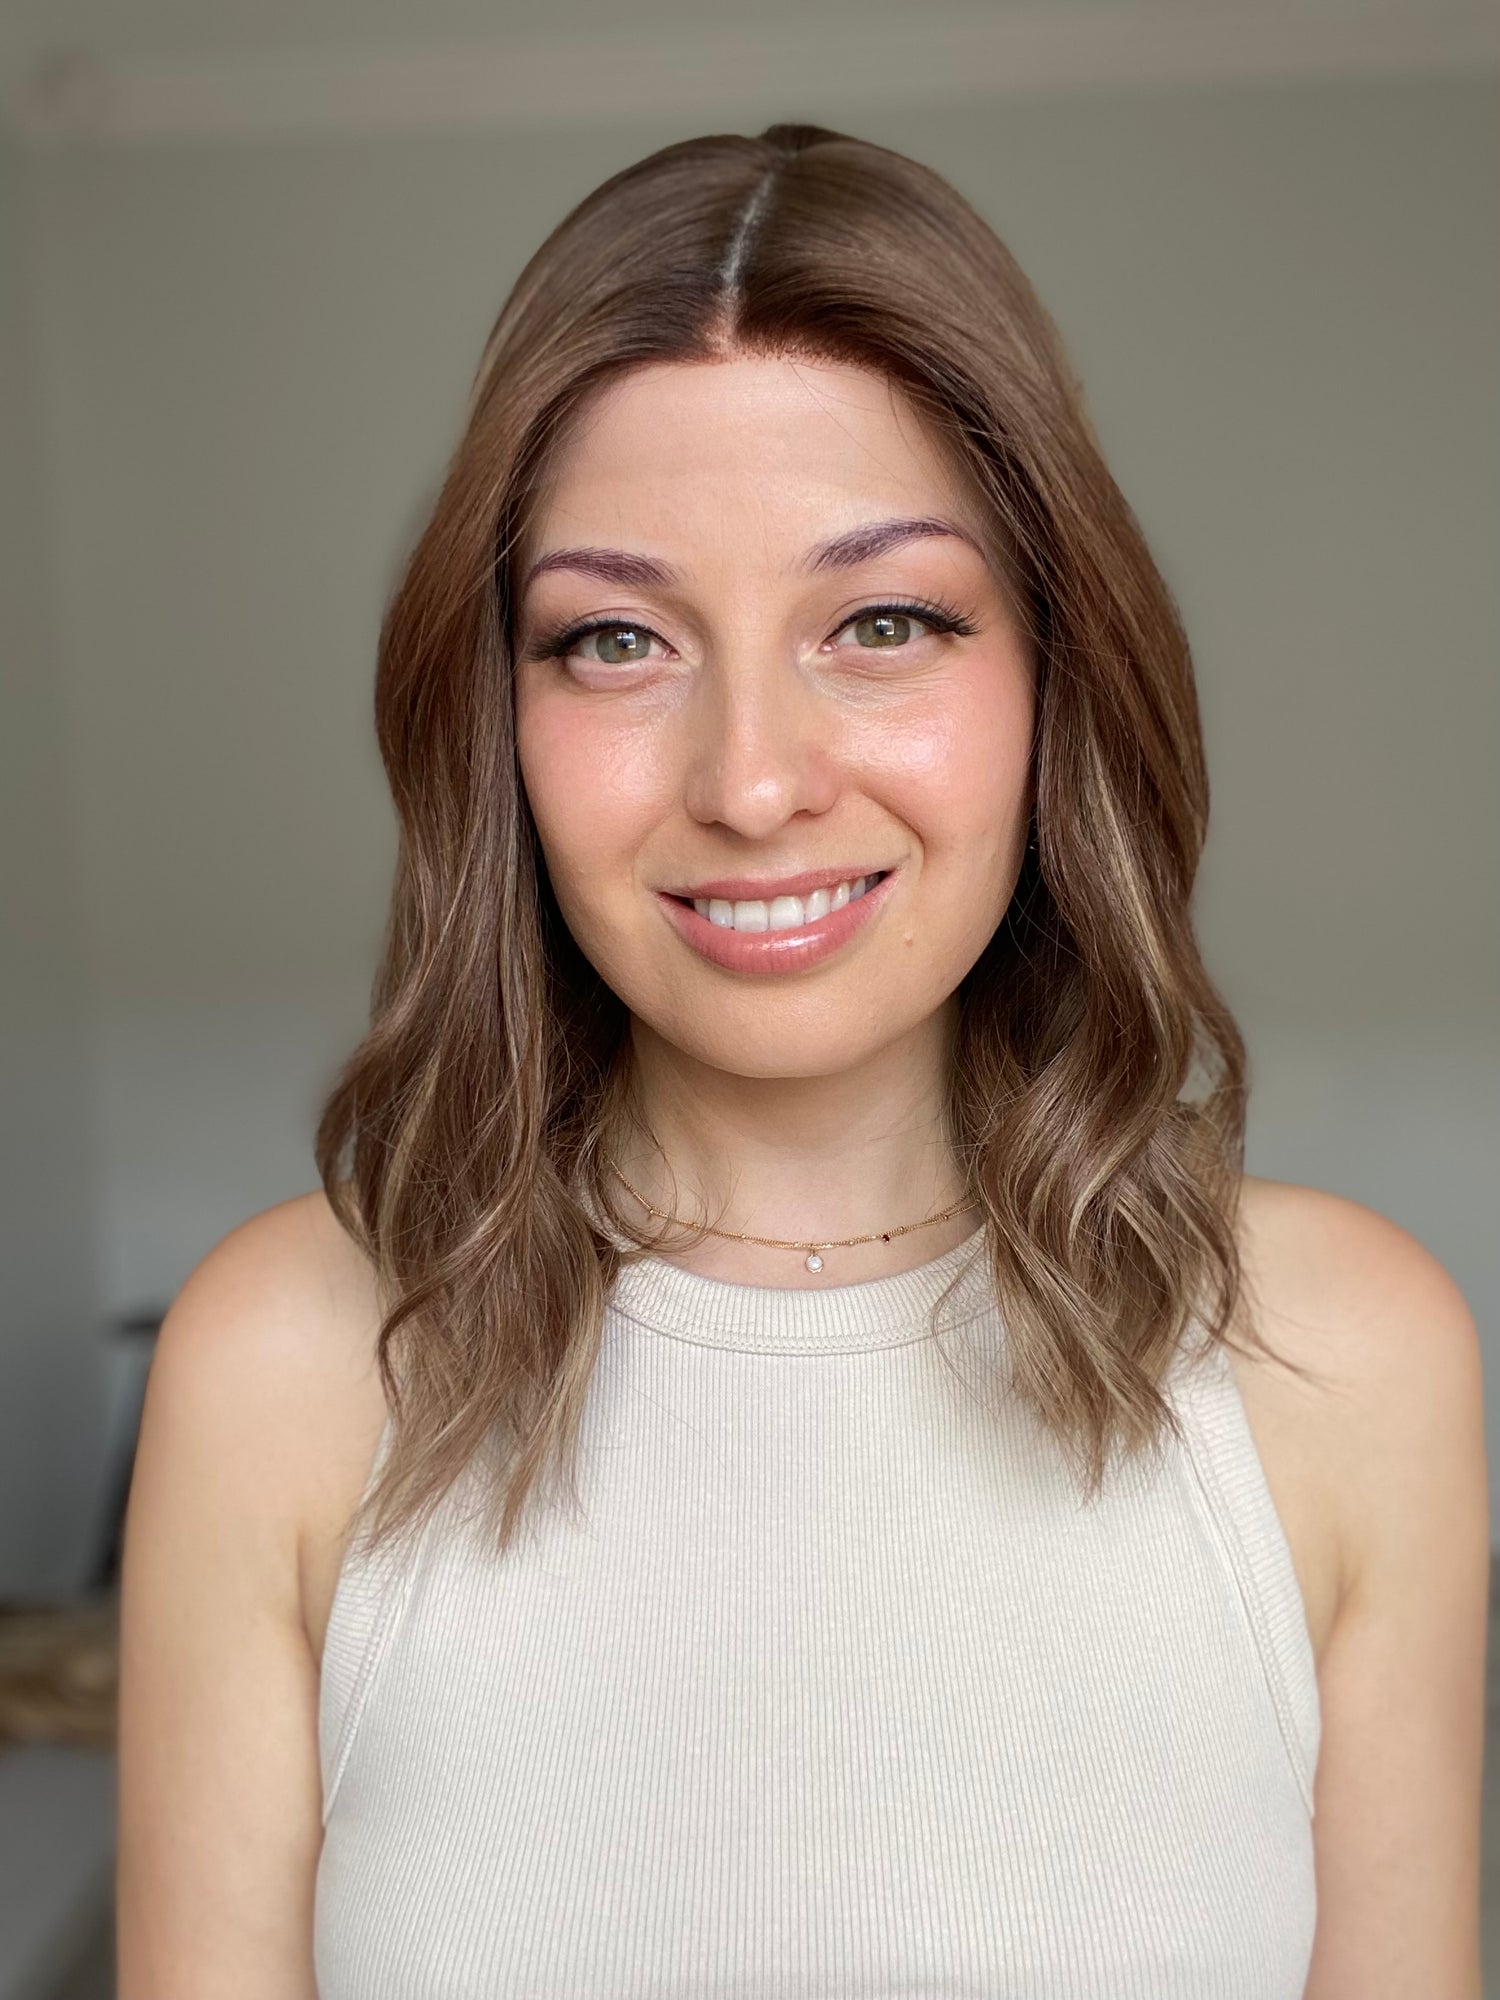 Brunette Dimensional Balayage // Game Changer Wig // 16 inches // S Cap